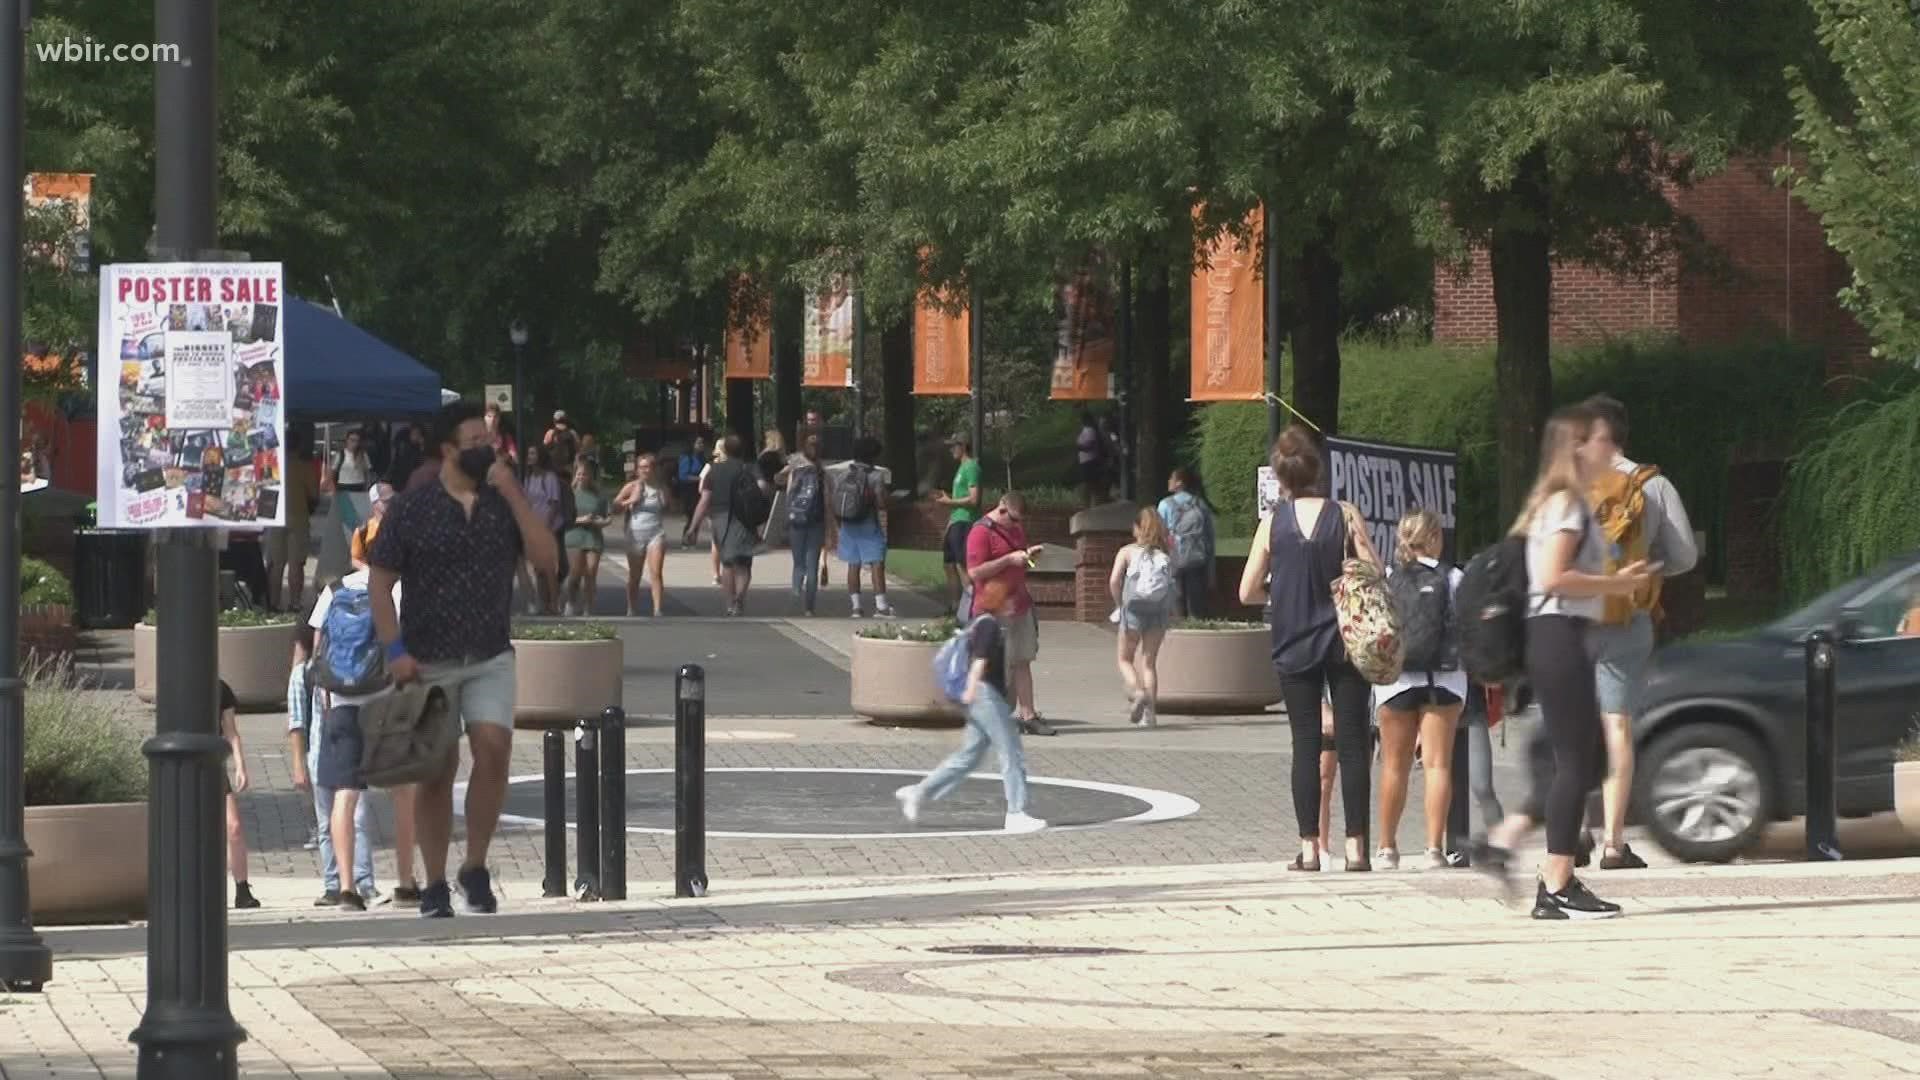 30,000 students are back on campus. Students are required to wear masks in class and labs.